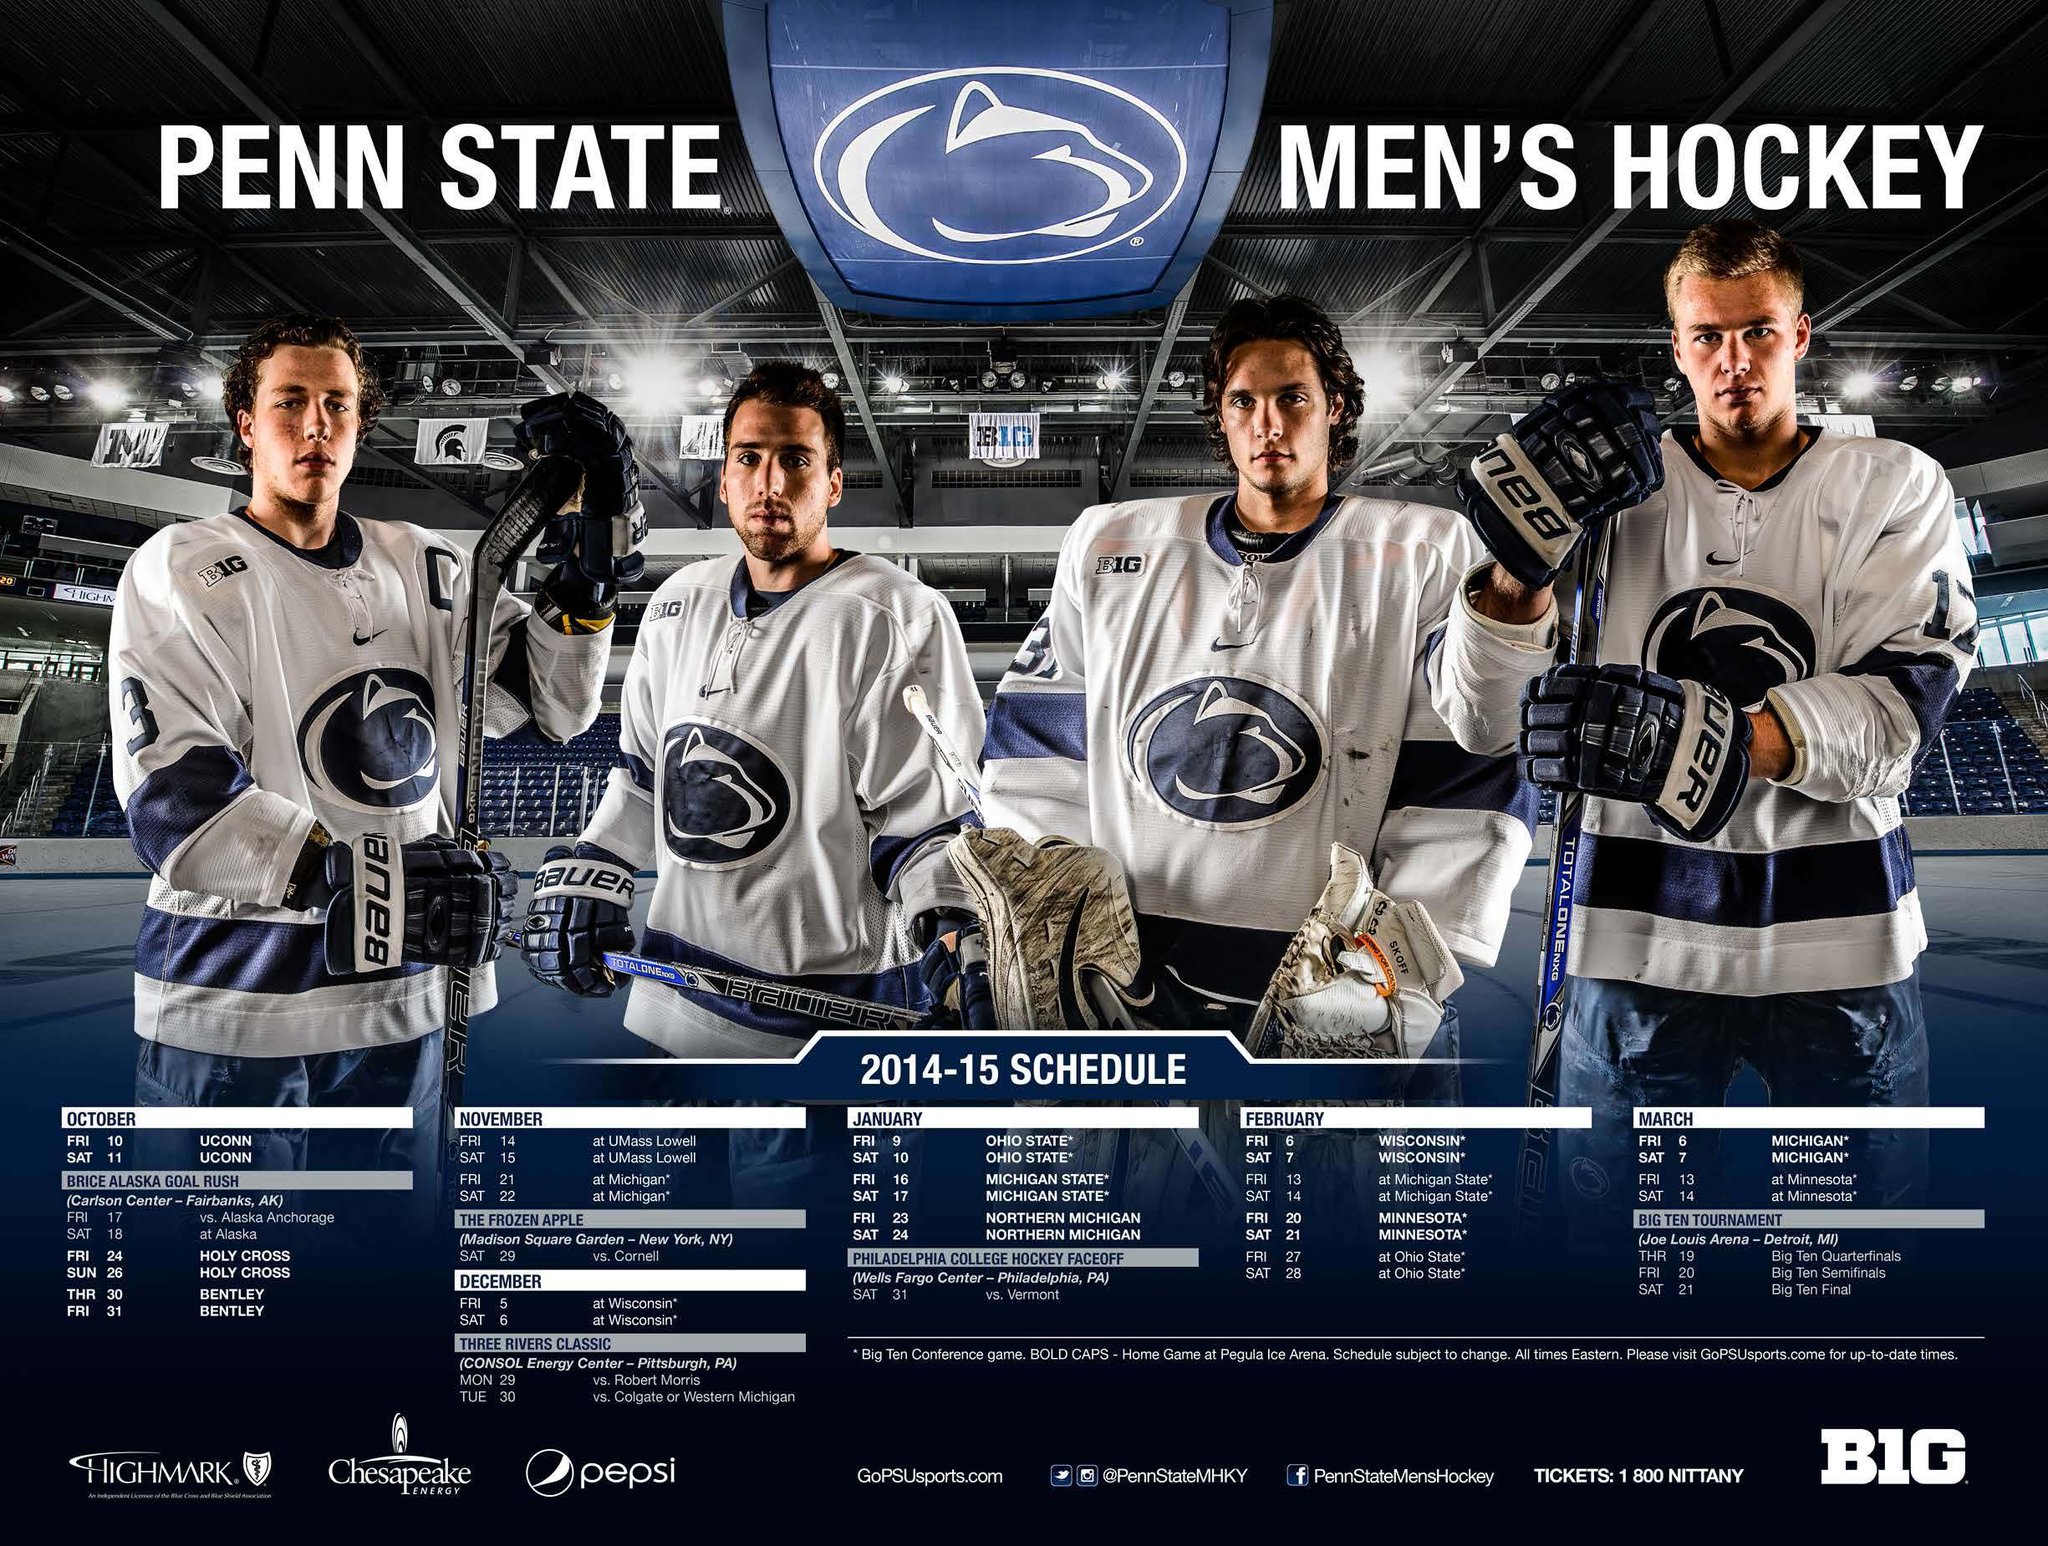 Penn State Men’s Hockey on Twitter "We're 31 days from puck drop! Here